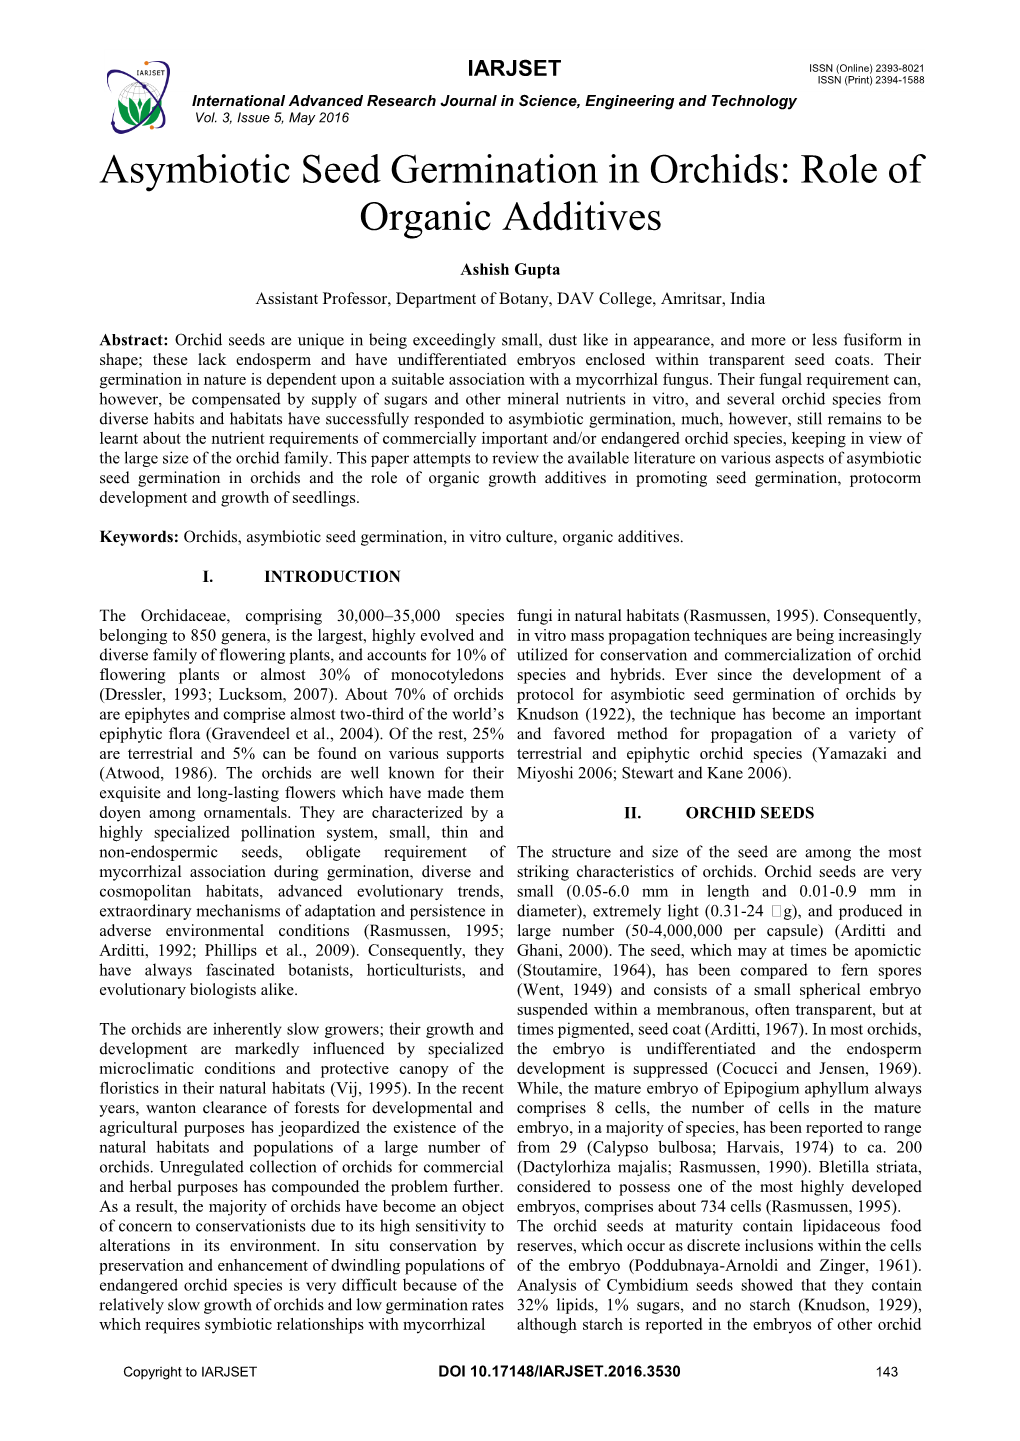 Asymbiotic Seed Germination in Orchids: Role of Organic Additives